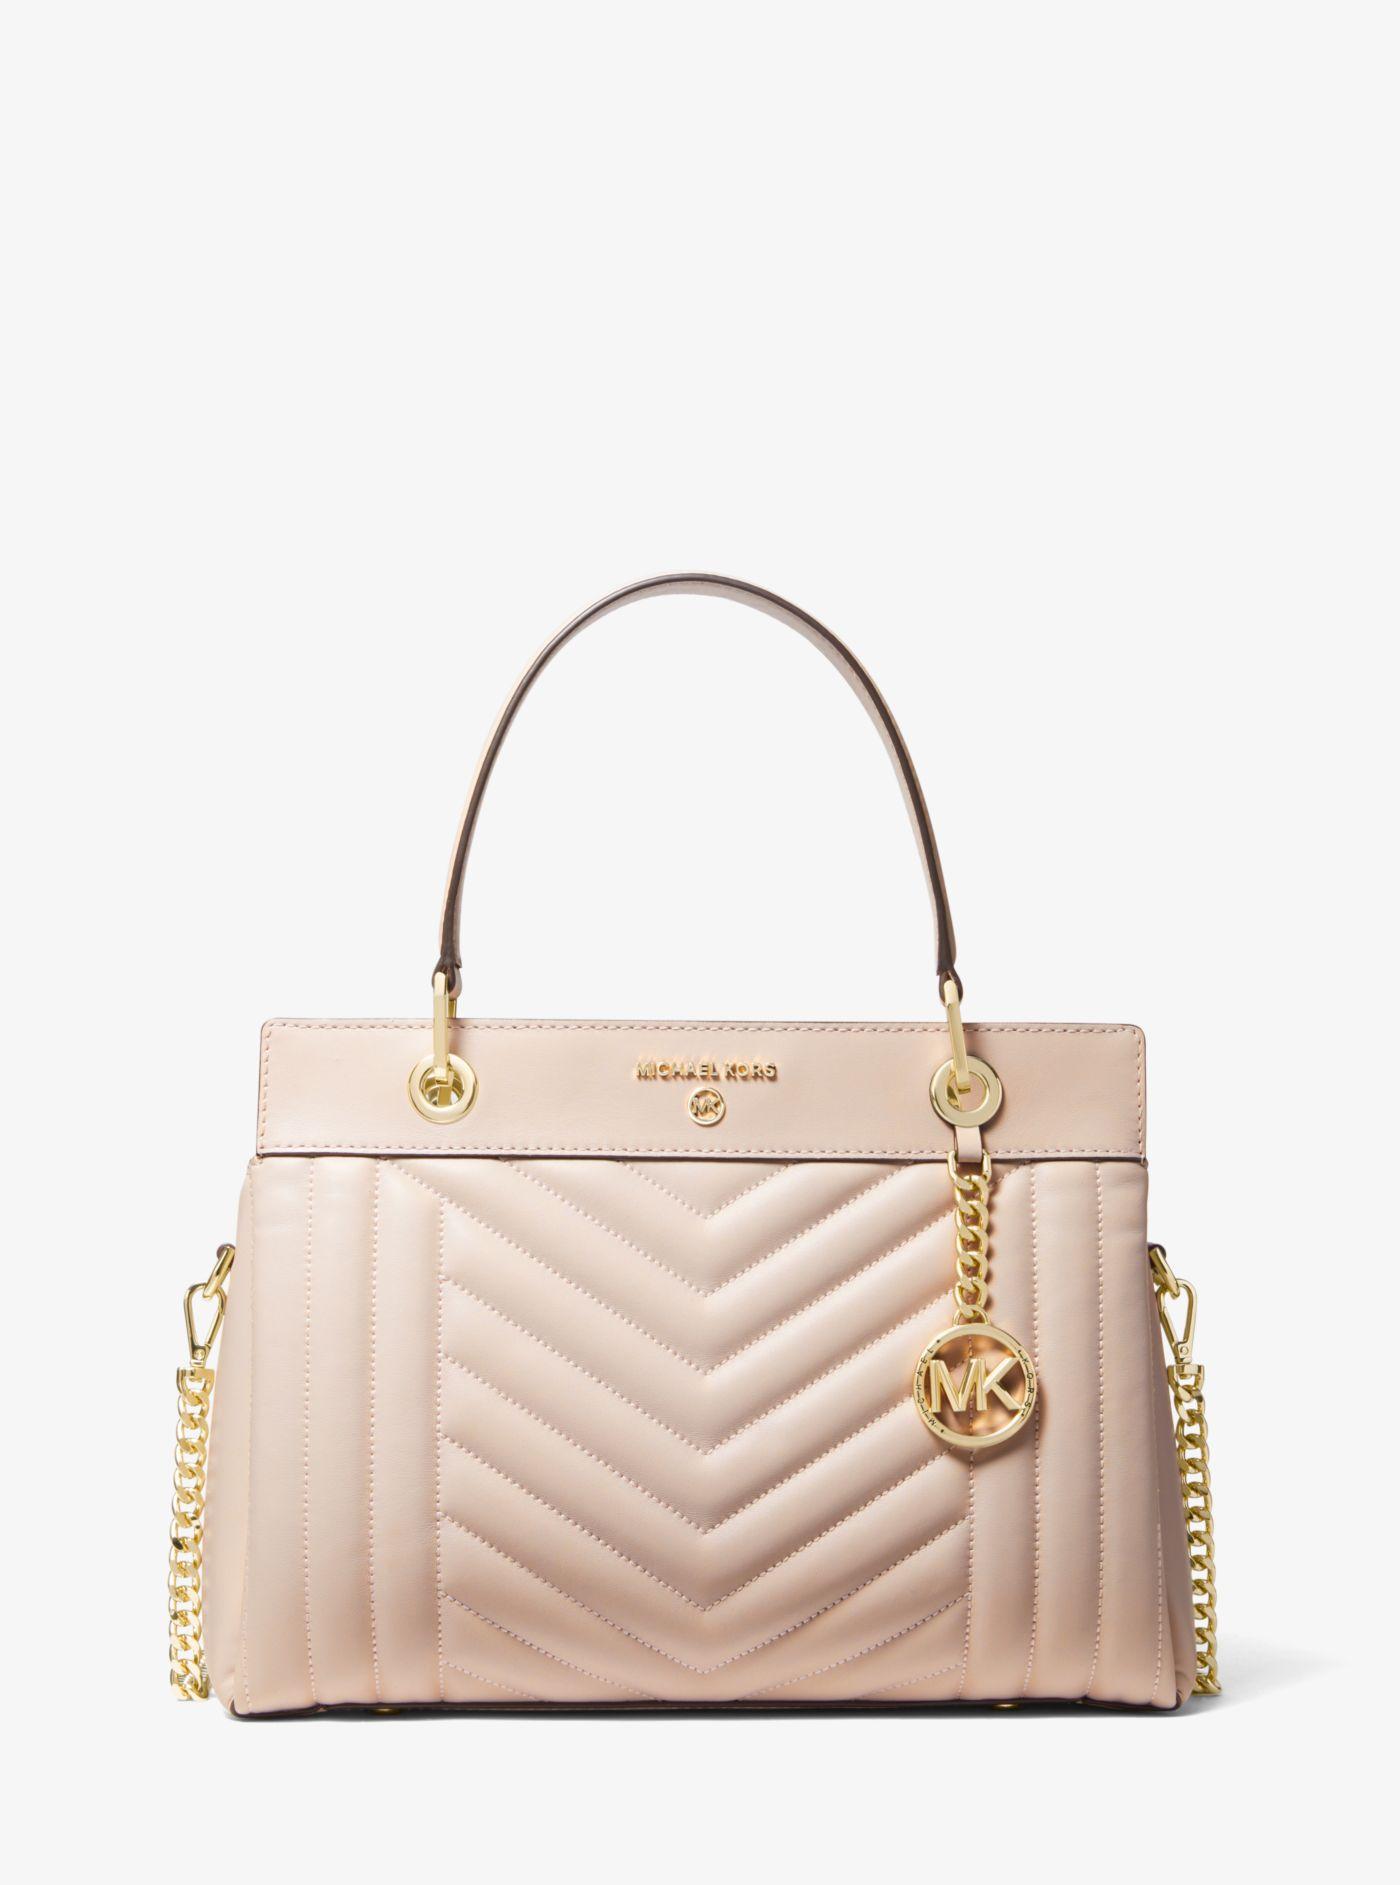 Michael Kors Susan Medium Quilted Leather Satchel in Soft Pink 